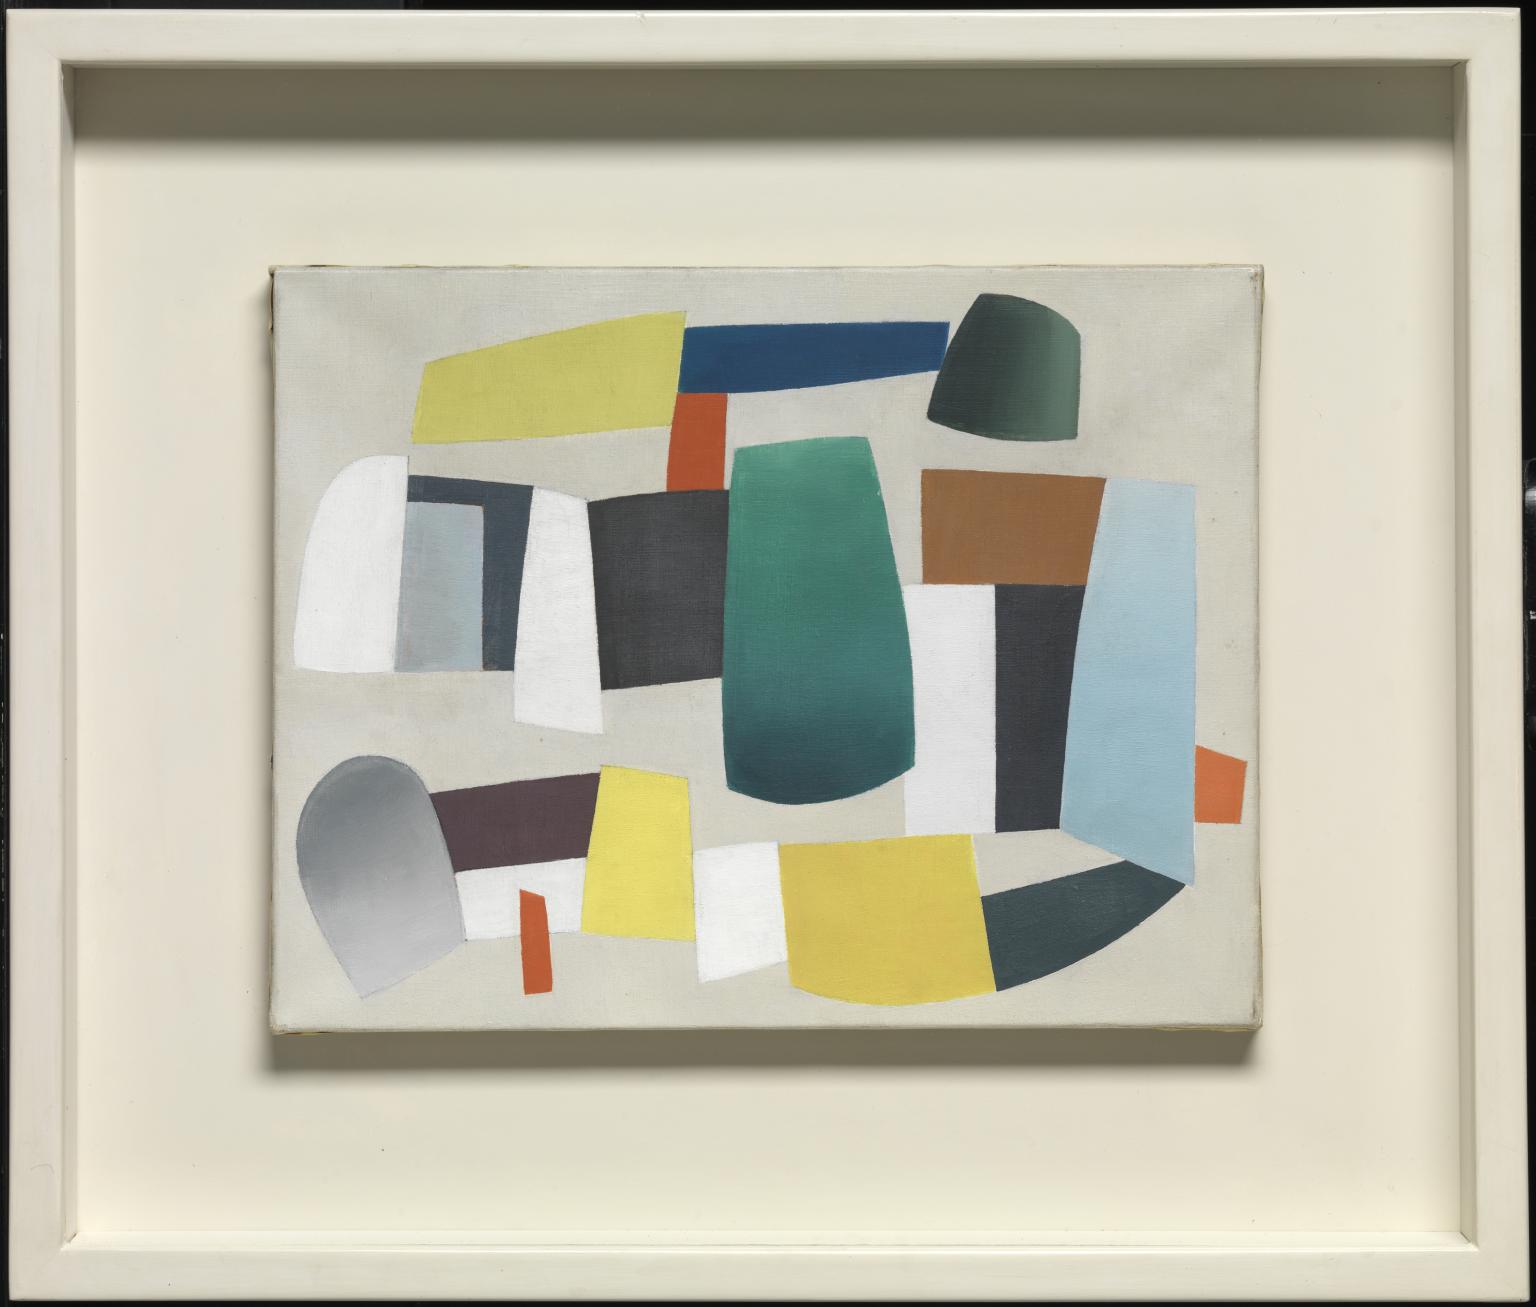 cute Shed headache Abstract Composition', Jean Hélion, 1934 | Tate